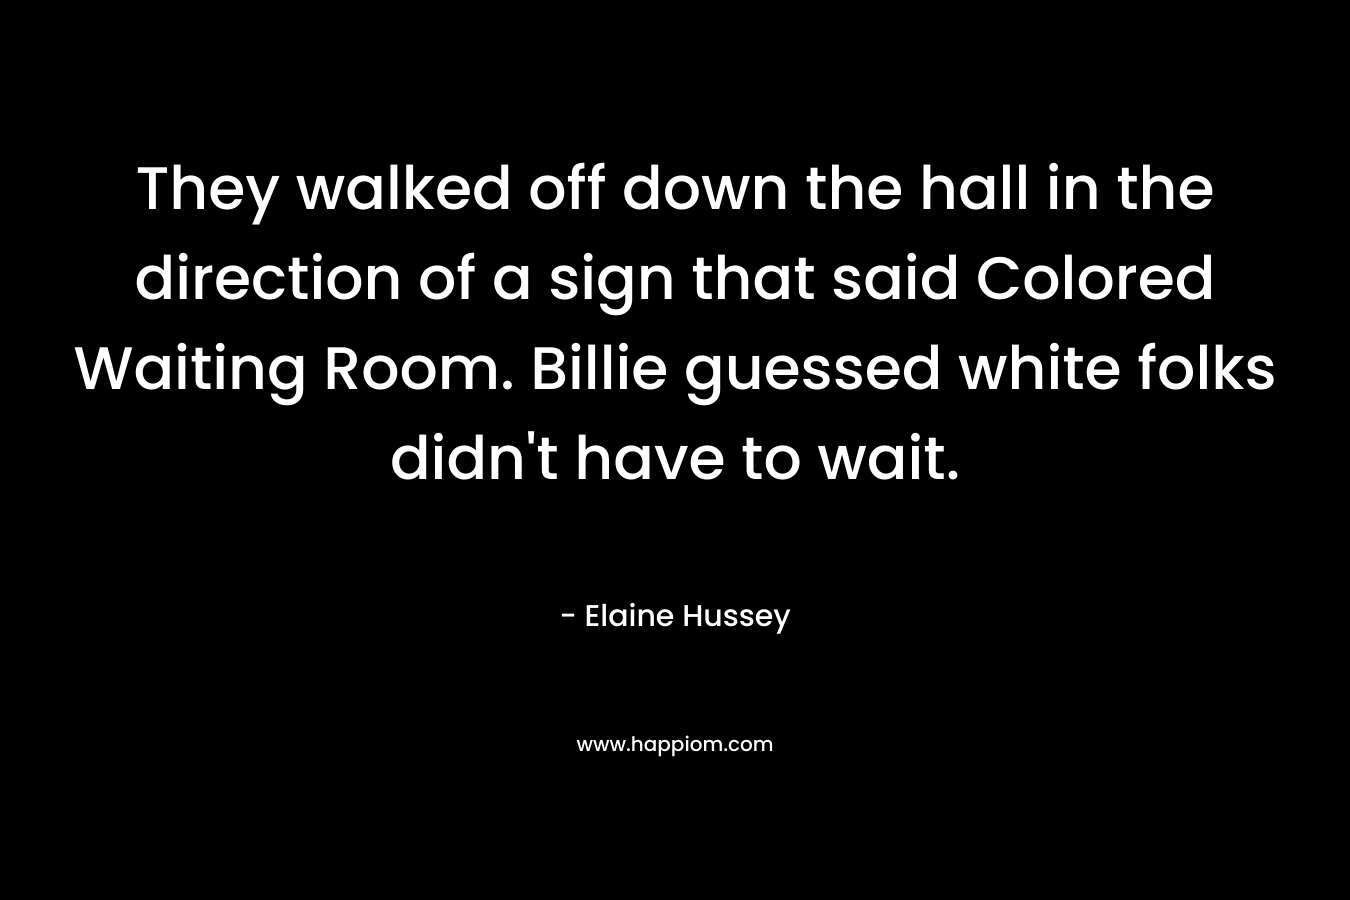 They walked off down the hall in the direction of a sign that said Colored Waiting Room. Billie guessed white folks didn't have to wait.